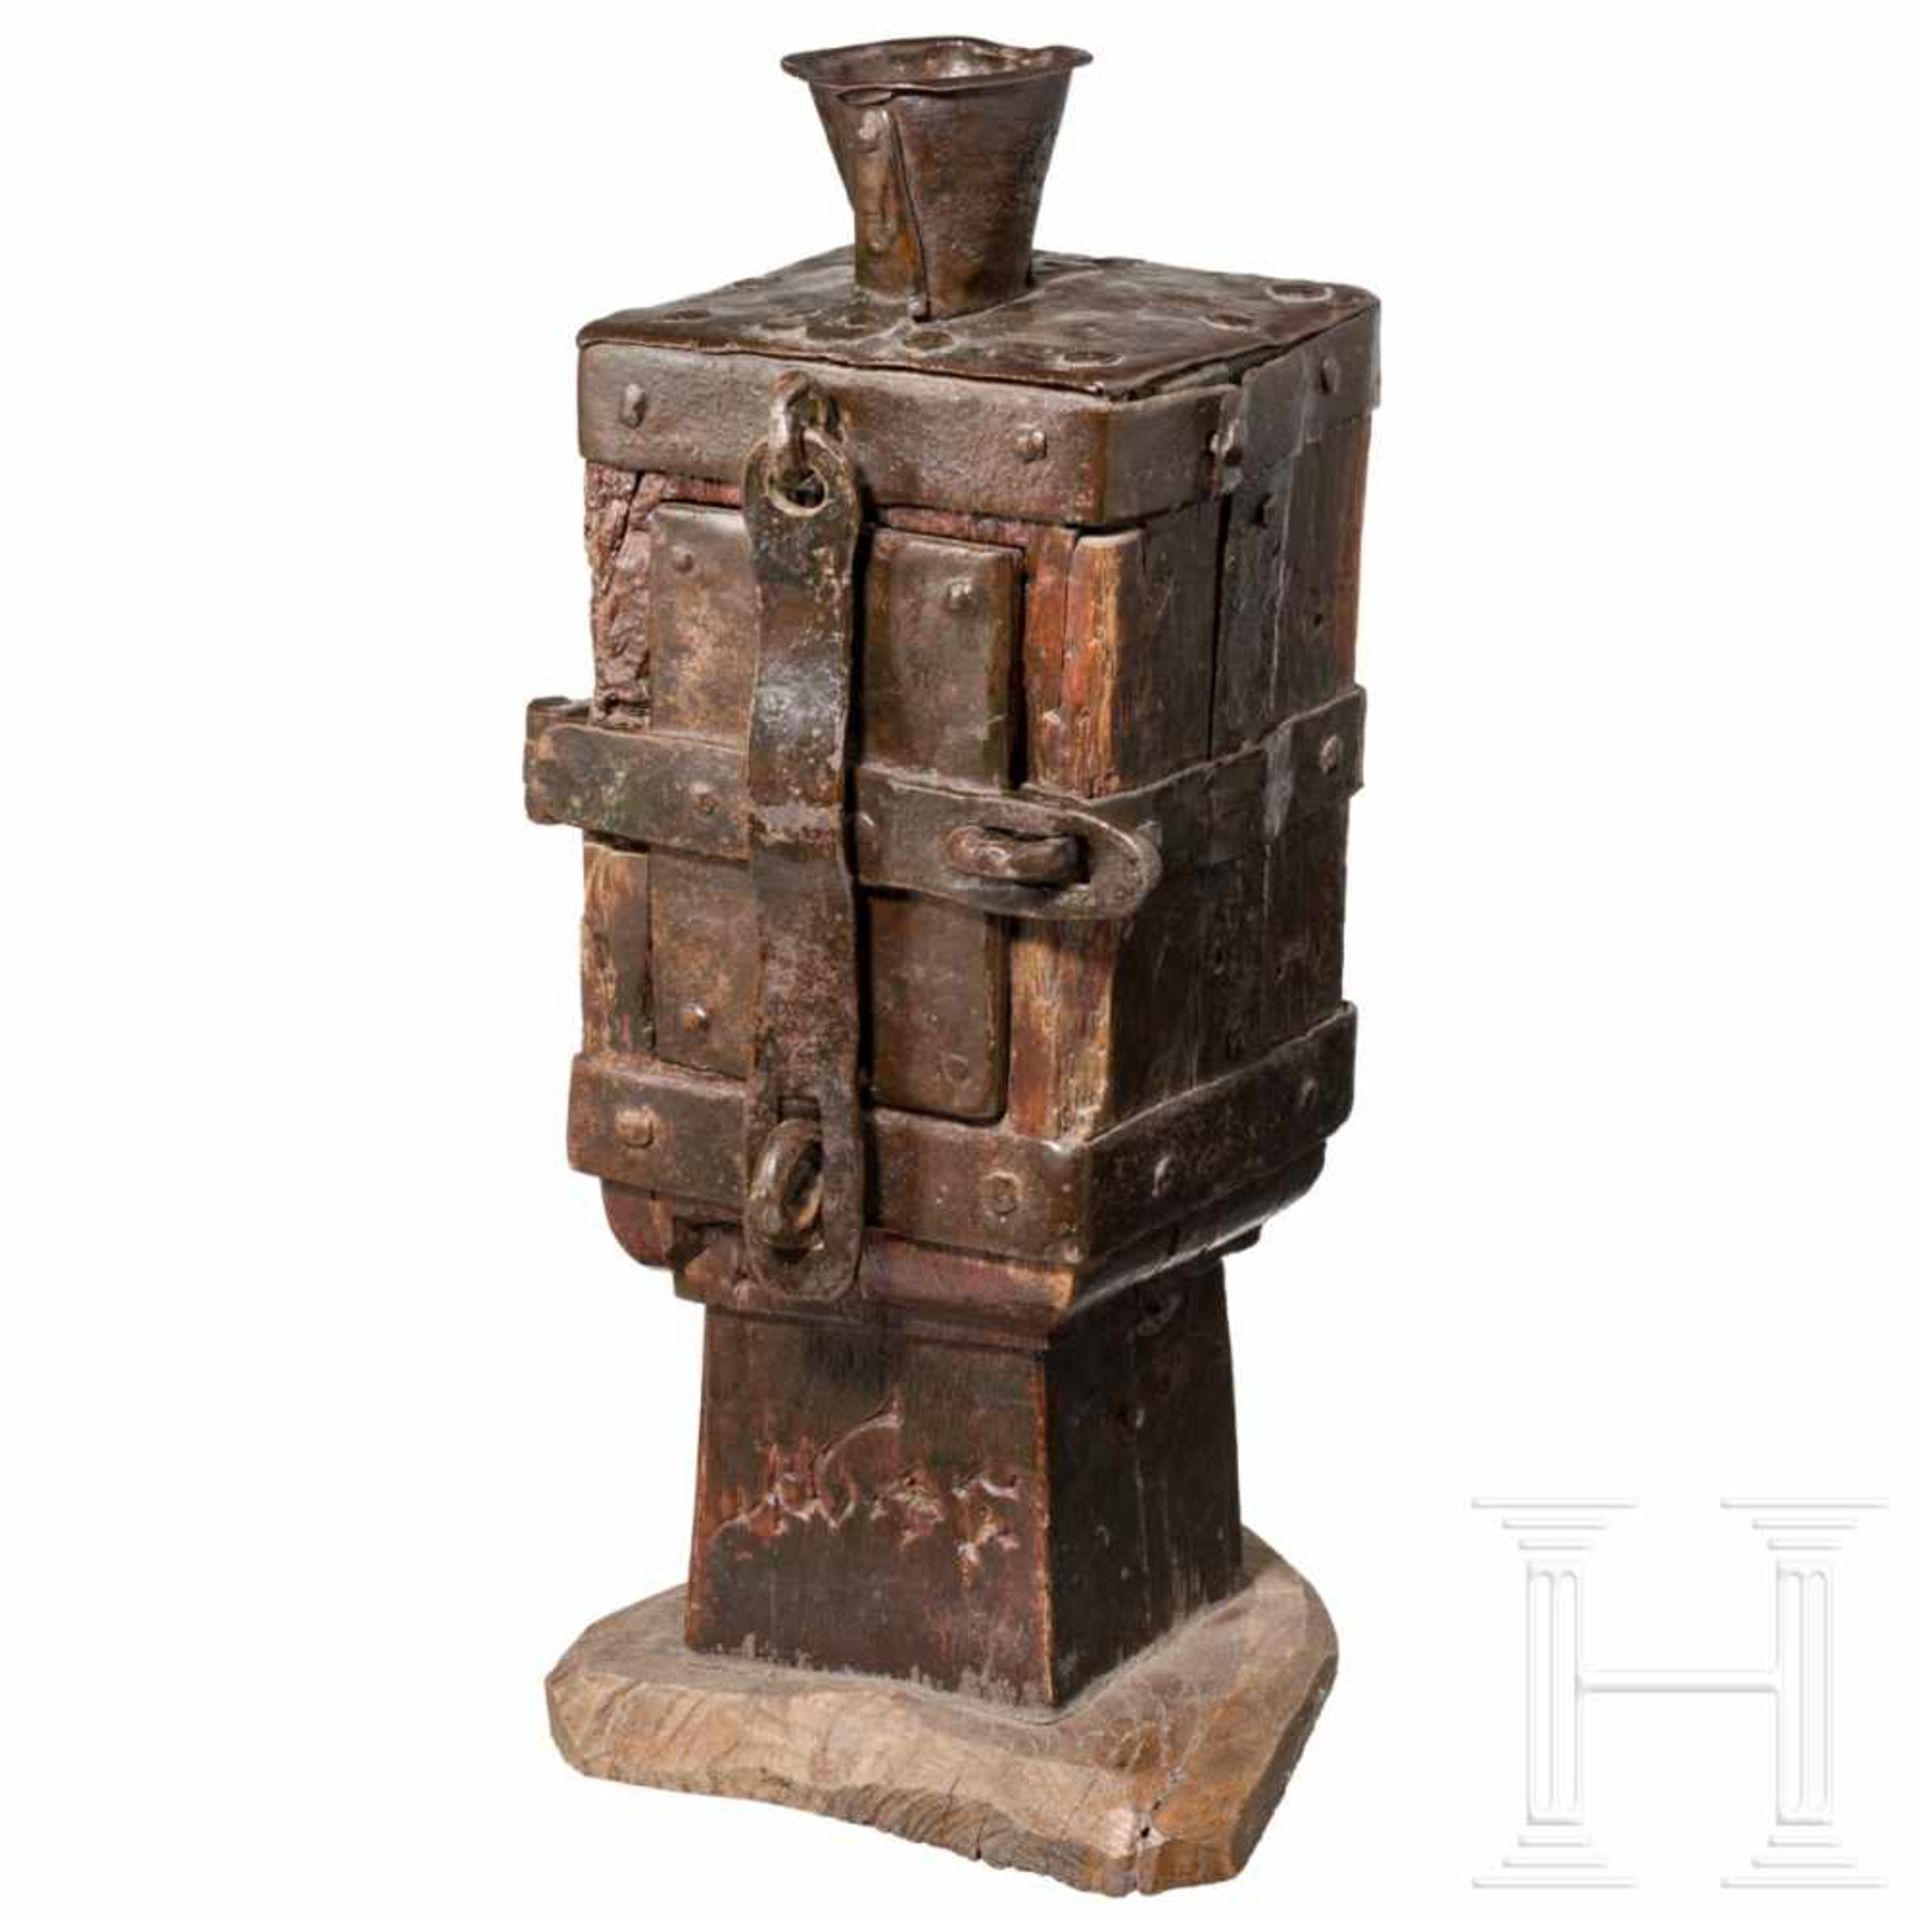 A dated South German iron mounted offertory box, 17th centuryOne door. Forged iron on strong